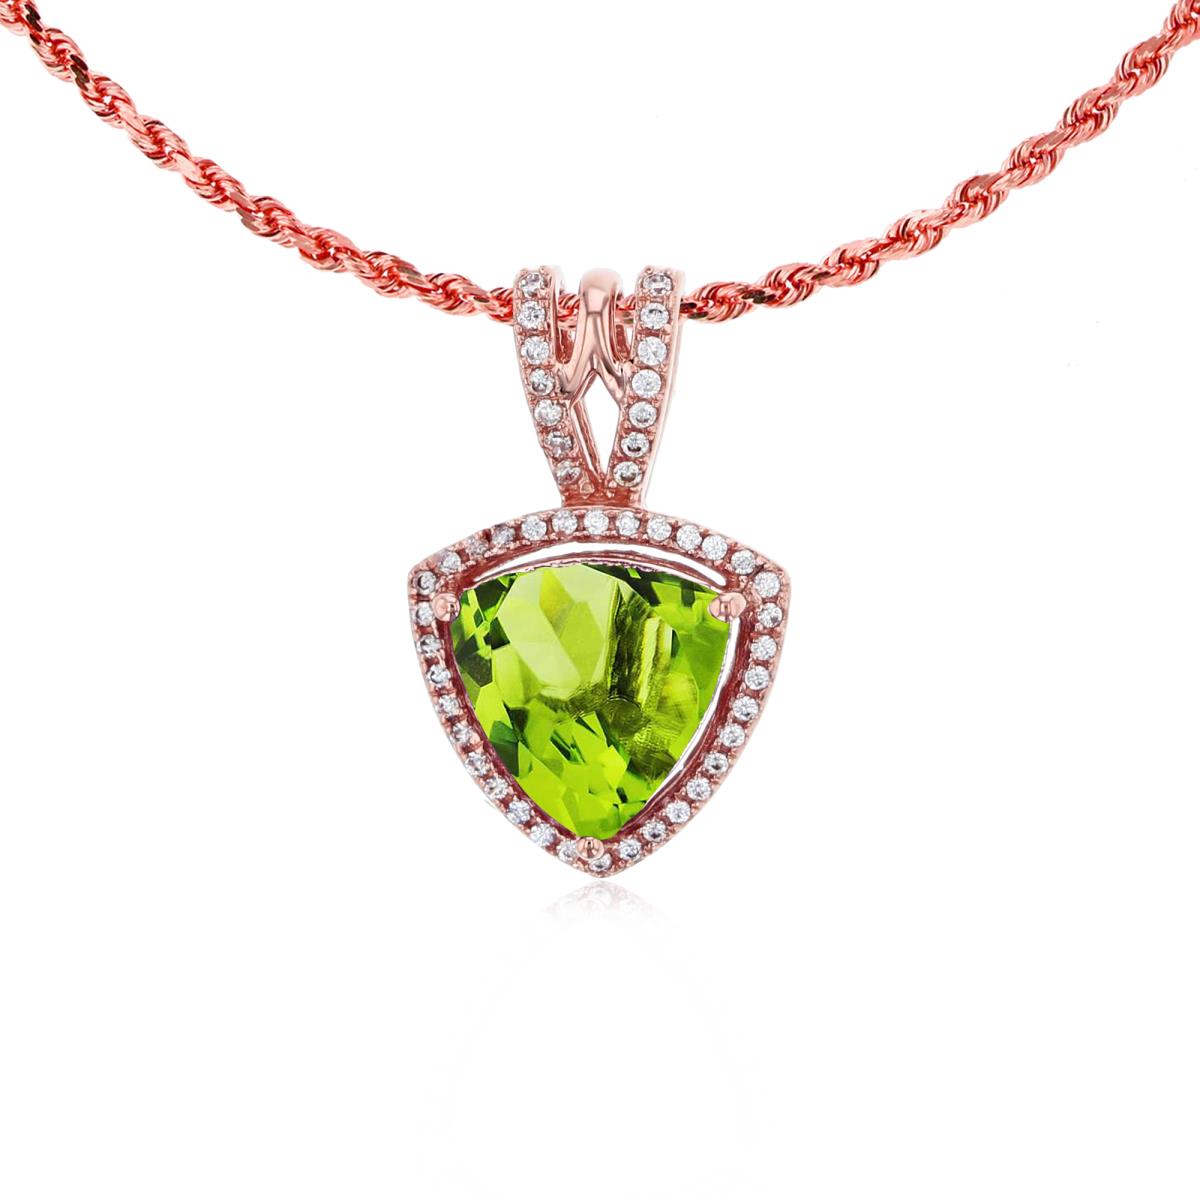 10K Rose Gold 8mm Trillion Peridot & 0.13 CTTW Diamonds Frame 18" Rope Chain Necklace